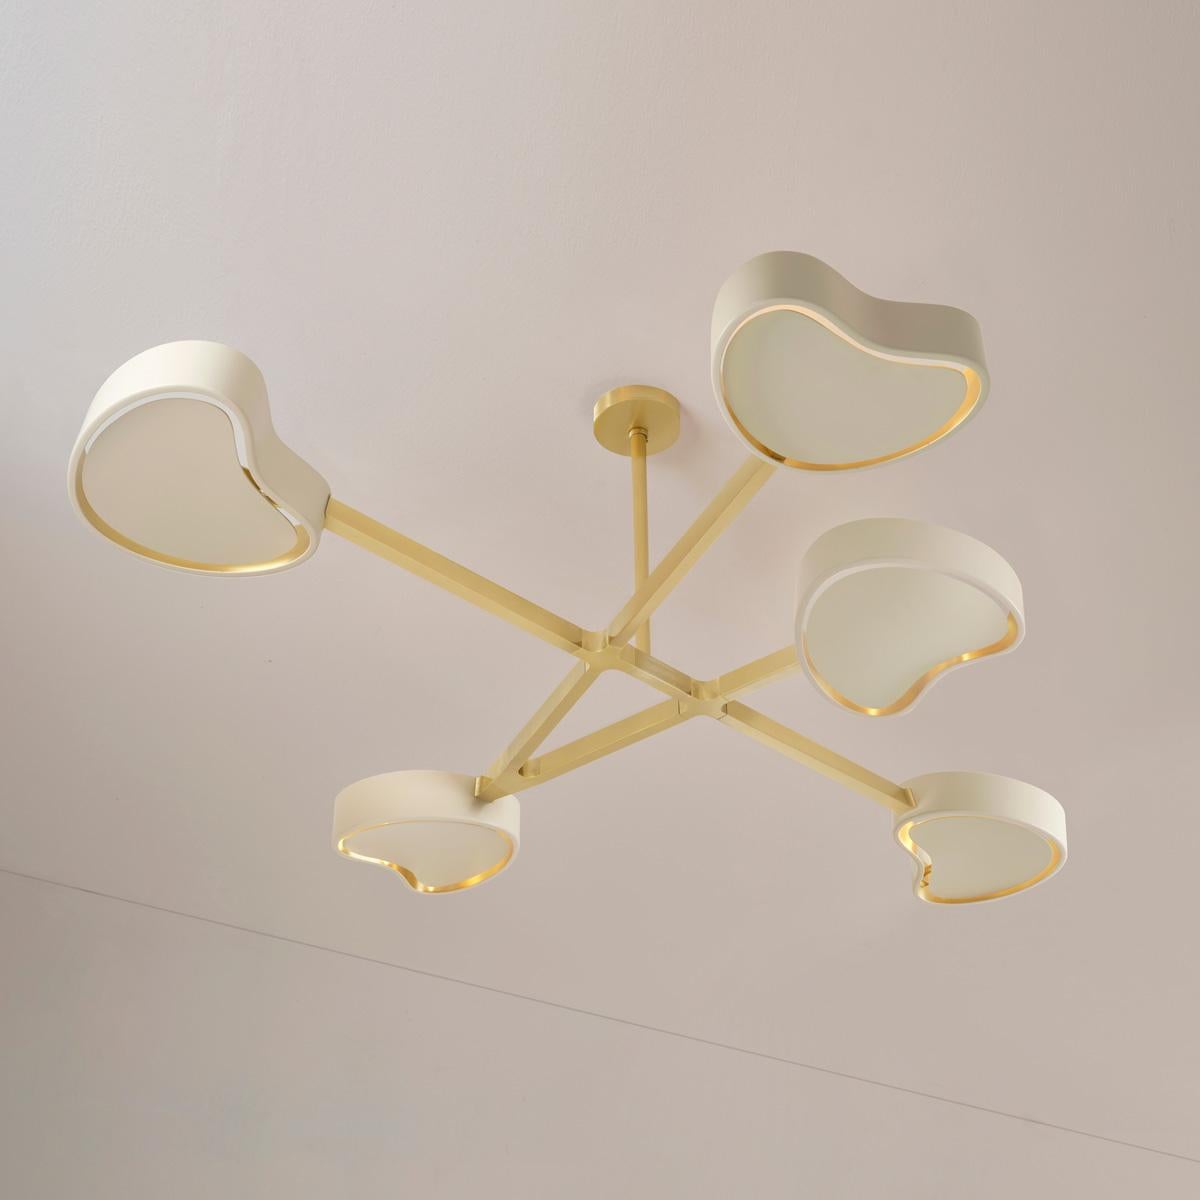 Italian Cuore N.5 Ceiling Light by Gaspare Asaro. Polished Brass Finish For Sale